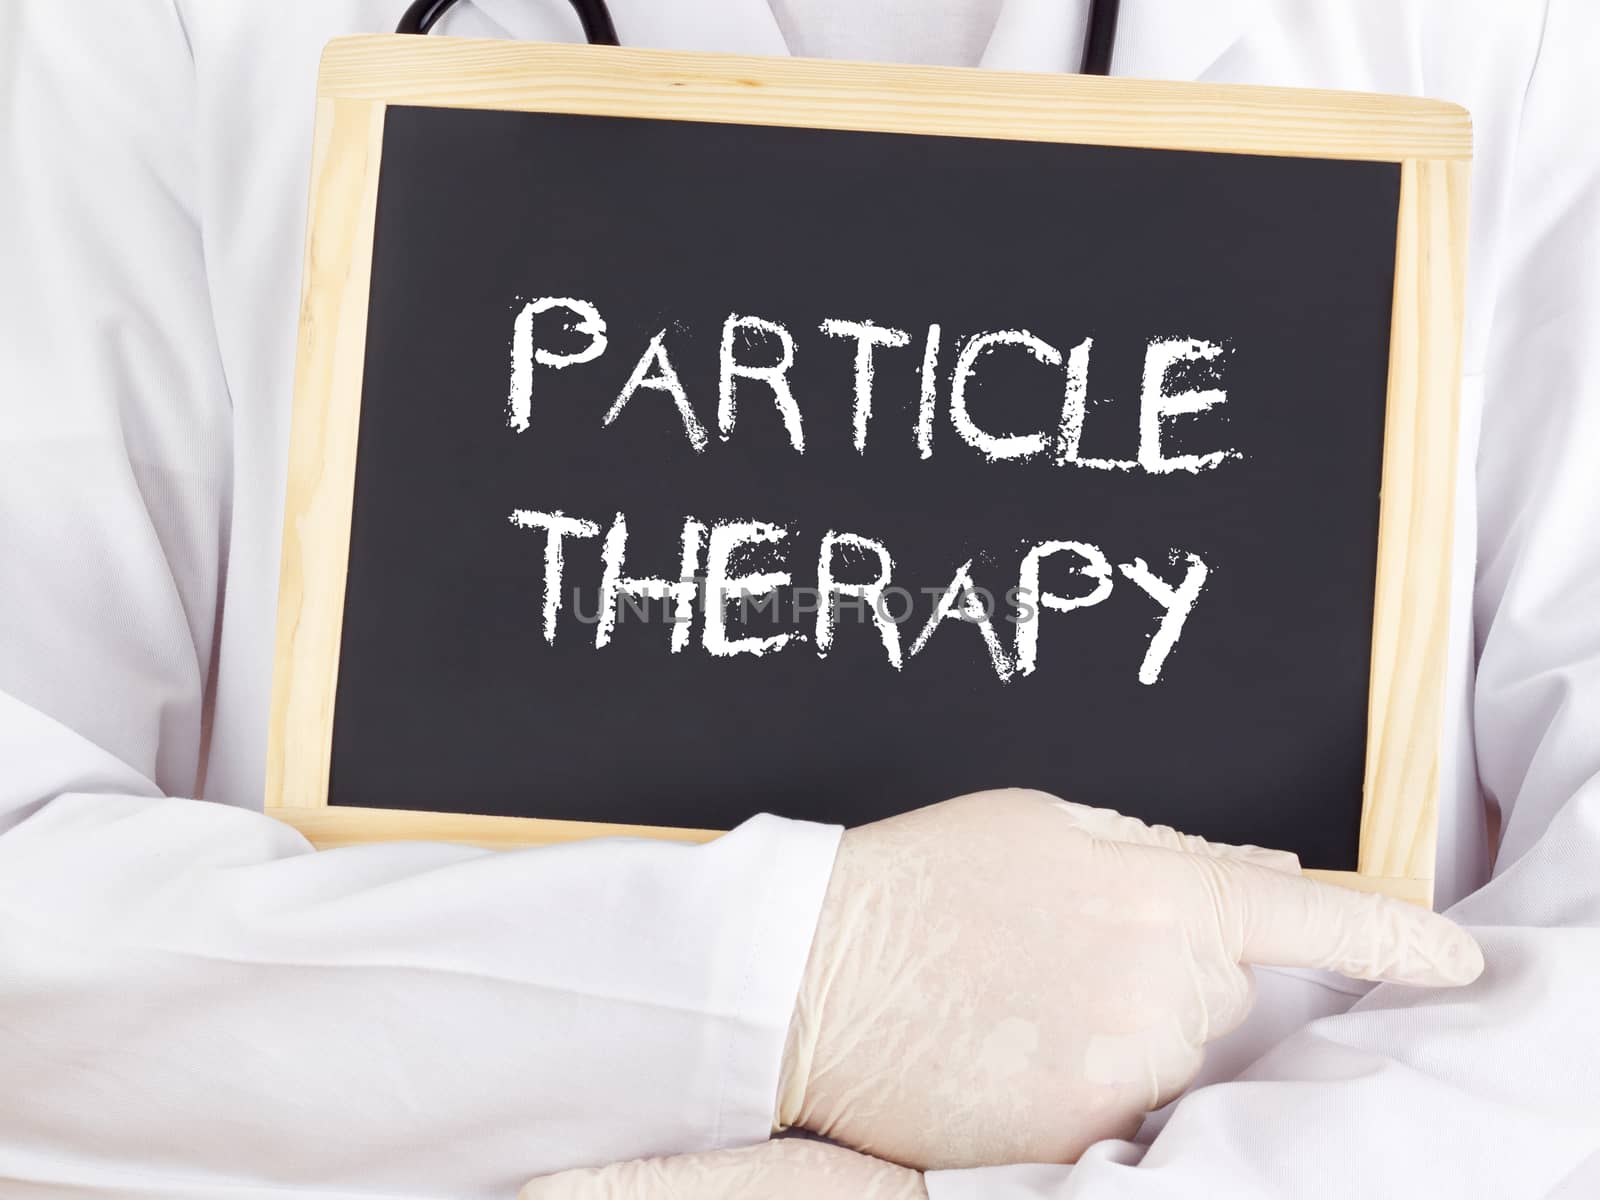 Doctor shows information: particle therapy by gwolters